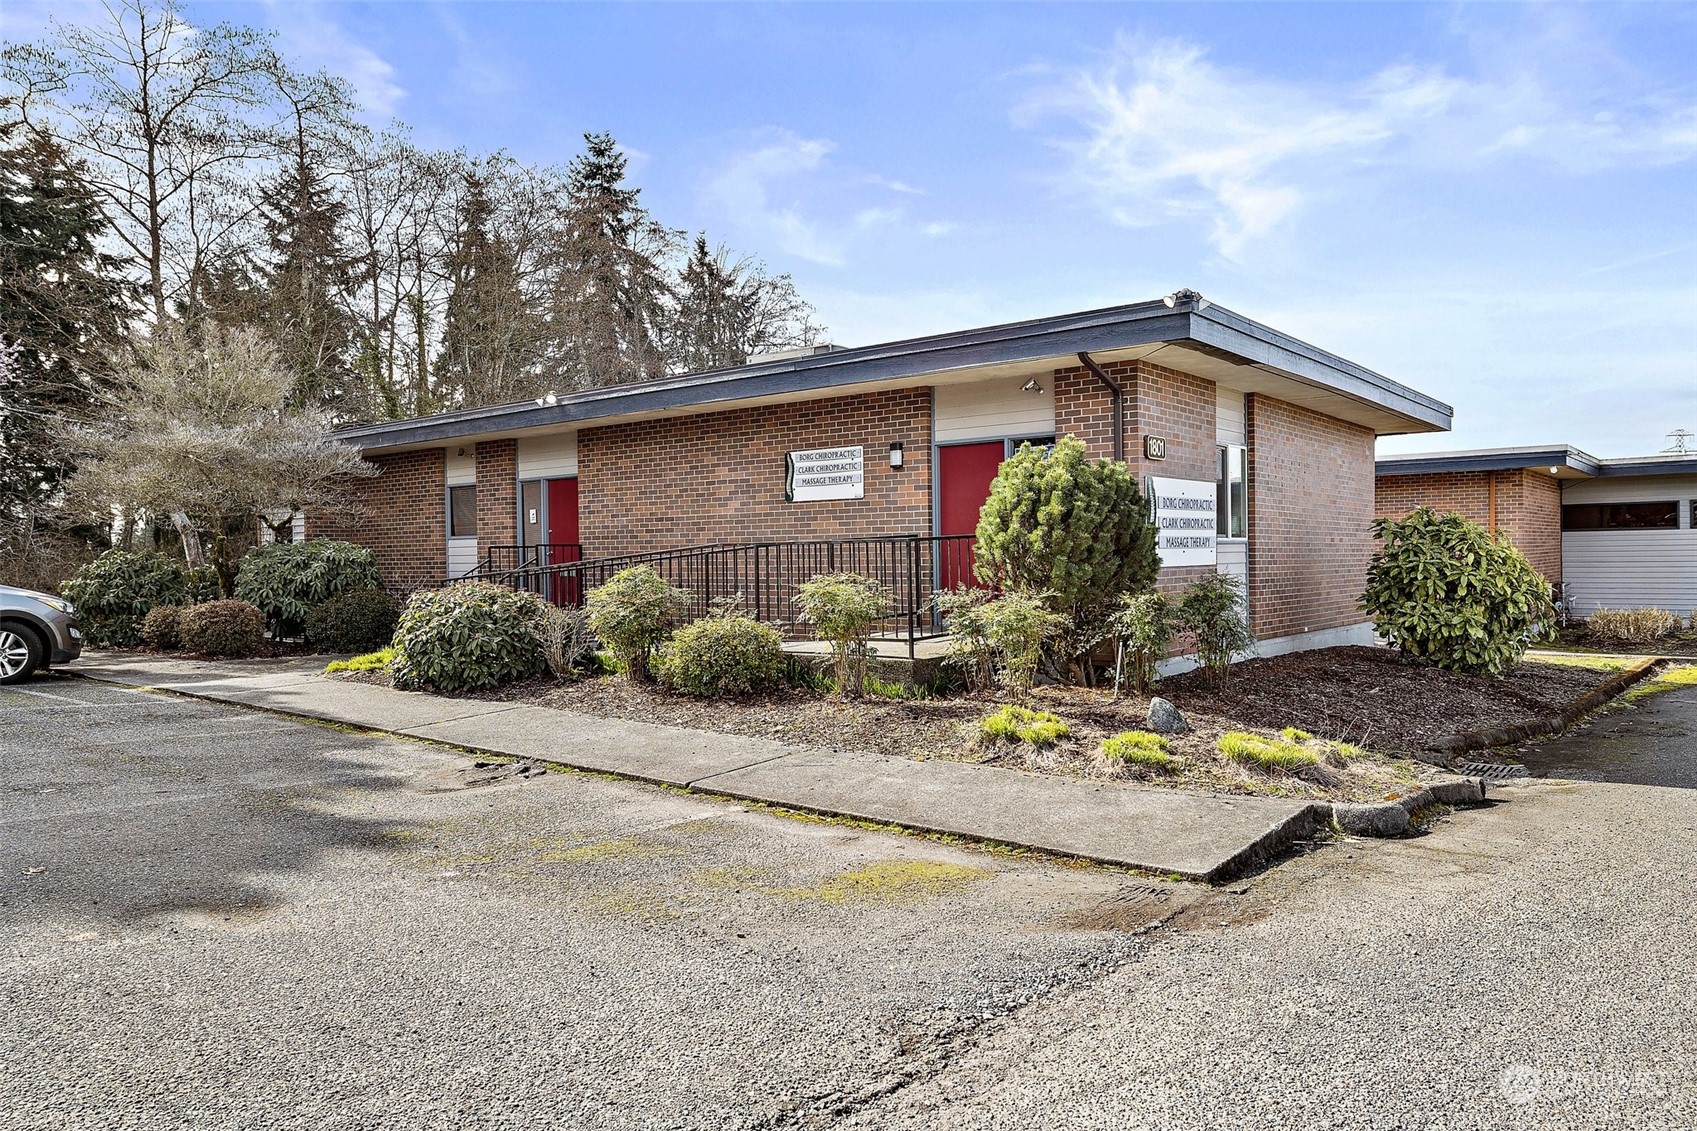 Photo of 1801 S 324th Place, Federal Way, WA 98003